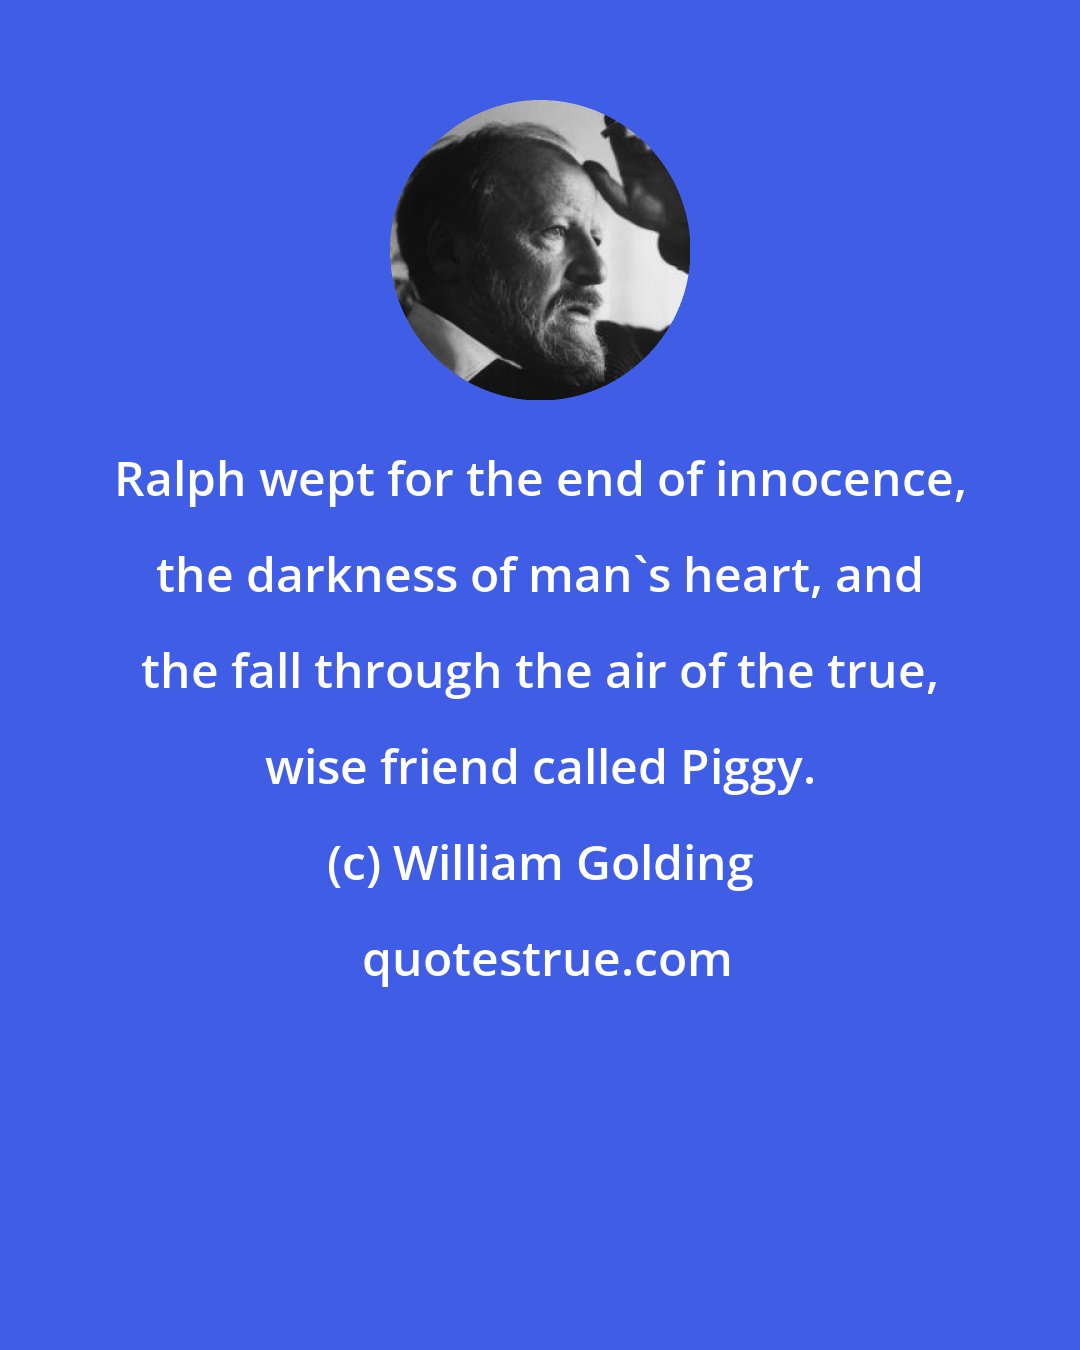 William Golding: Ralph wept for the end of innocence, the darkness of man's heart, and the fall through the air of the true, wise friend called Piggy.